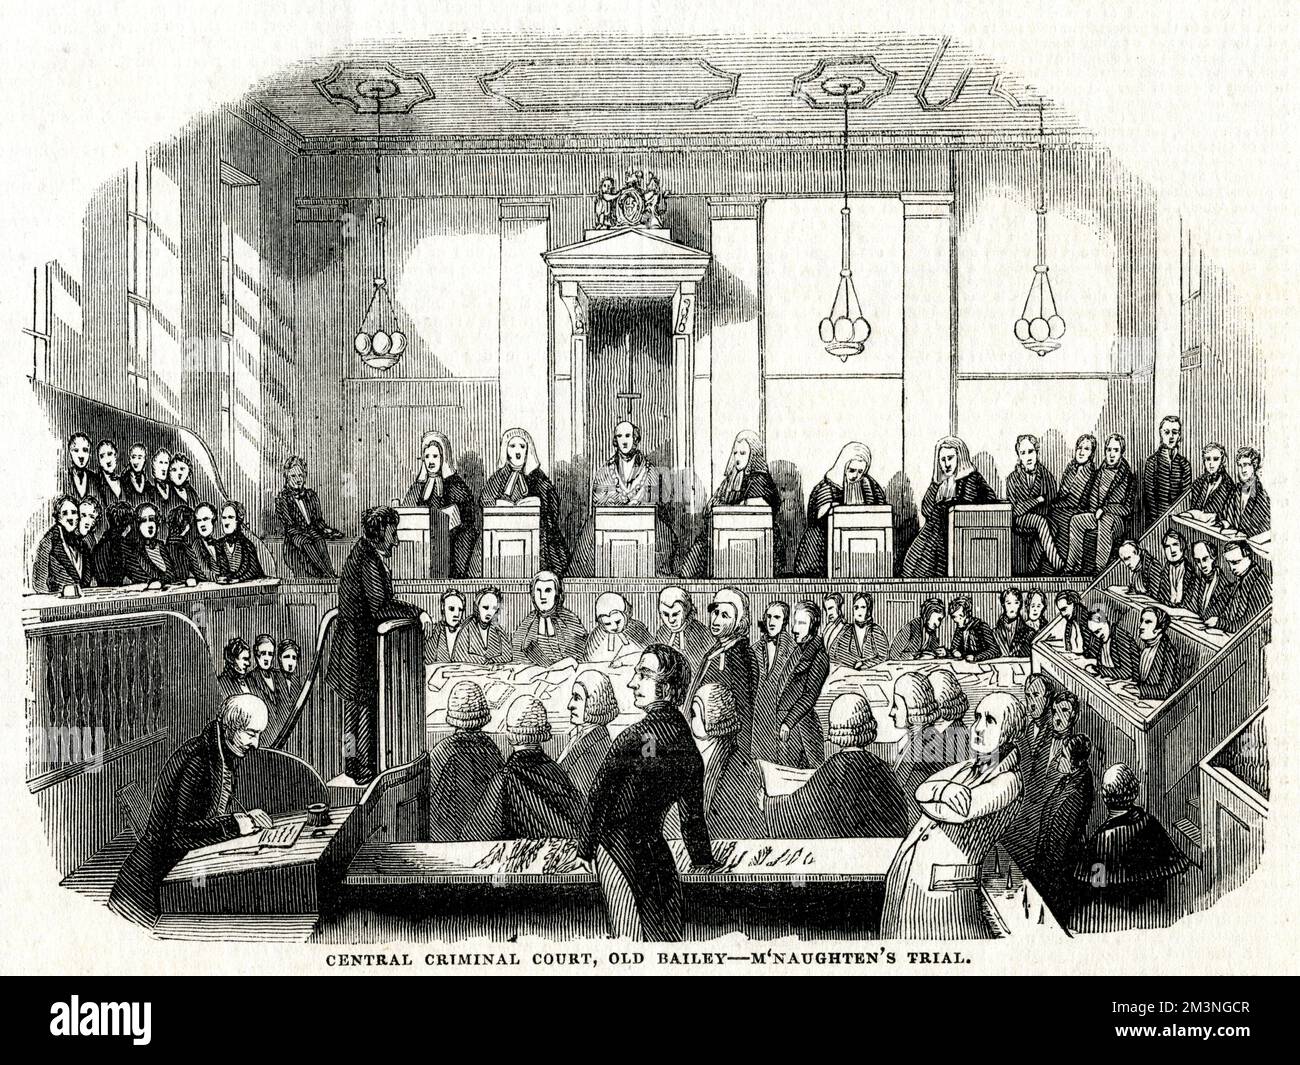 Scene at the Central Criminal Court at the Old Bailey showing the trial of Daniel McNaughten.  McNaughten (usually spelled M'Naughten) (1813  1865) was a Scottish woodturner who assassinated English civil servant and Private Secretary of Sir Robert Peel, Edward Drummond while suffering from paranoid delusions. Through his trial and its aftermath, he has given his name to the legal test of criminal insanity in England and other common law jurisdictions known as the M'Naghten Rules.     Date: 1843 Stock Photo